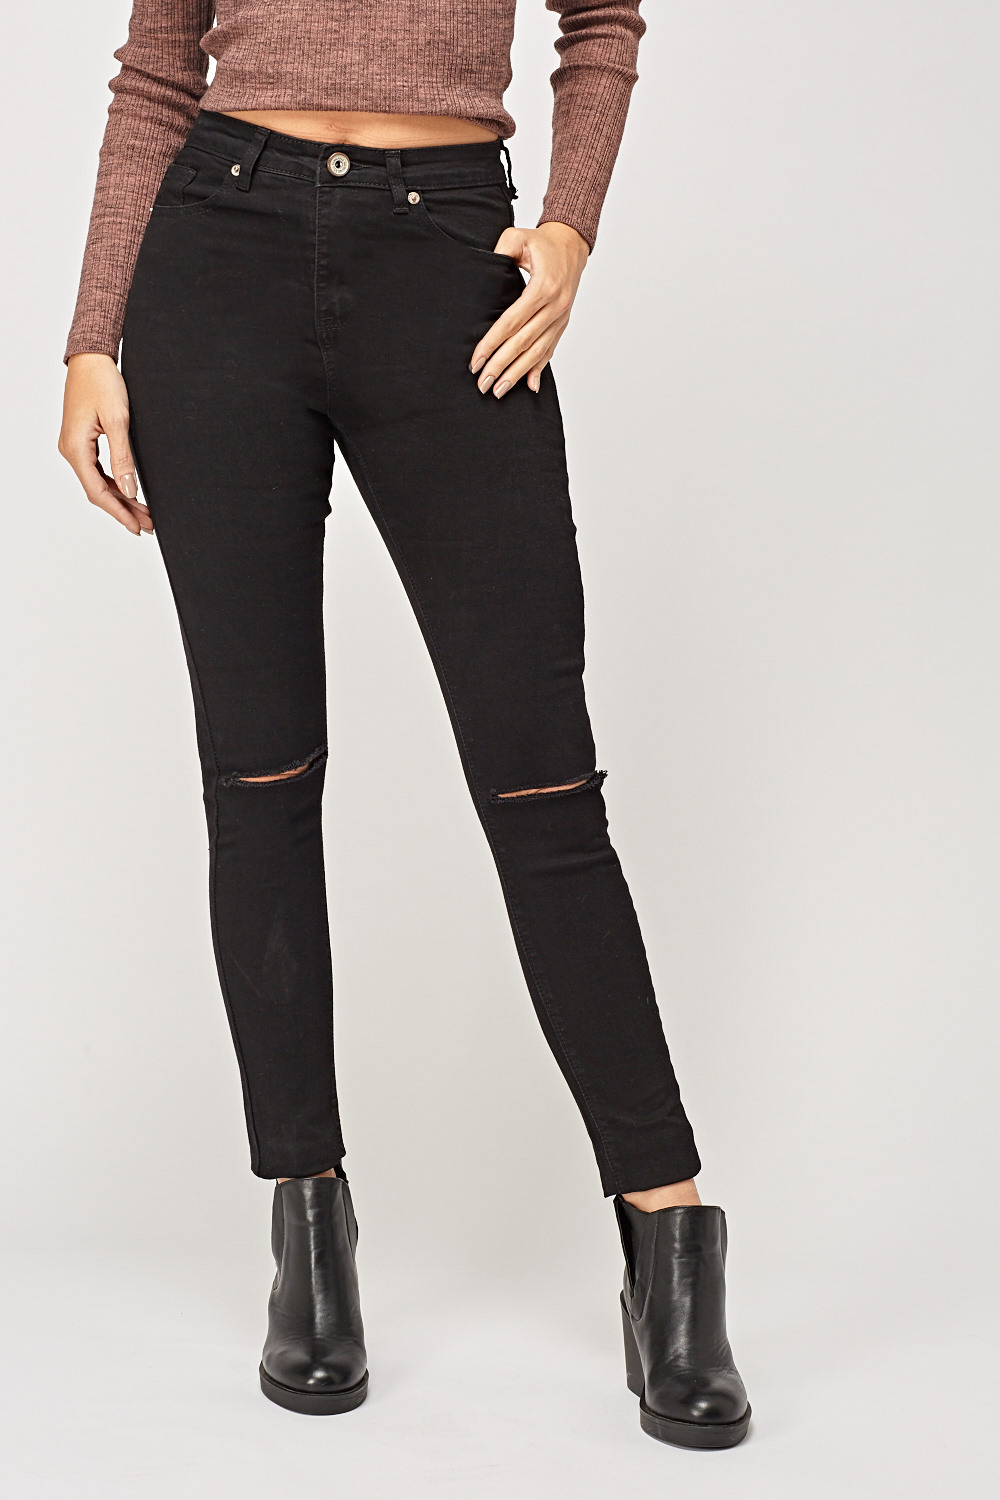 Ripped Knee Black Jeans - Just $7